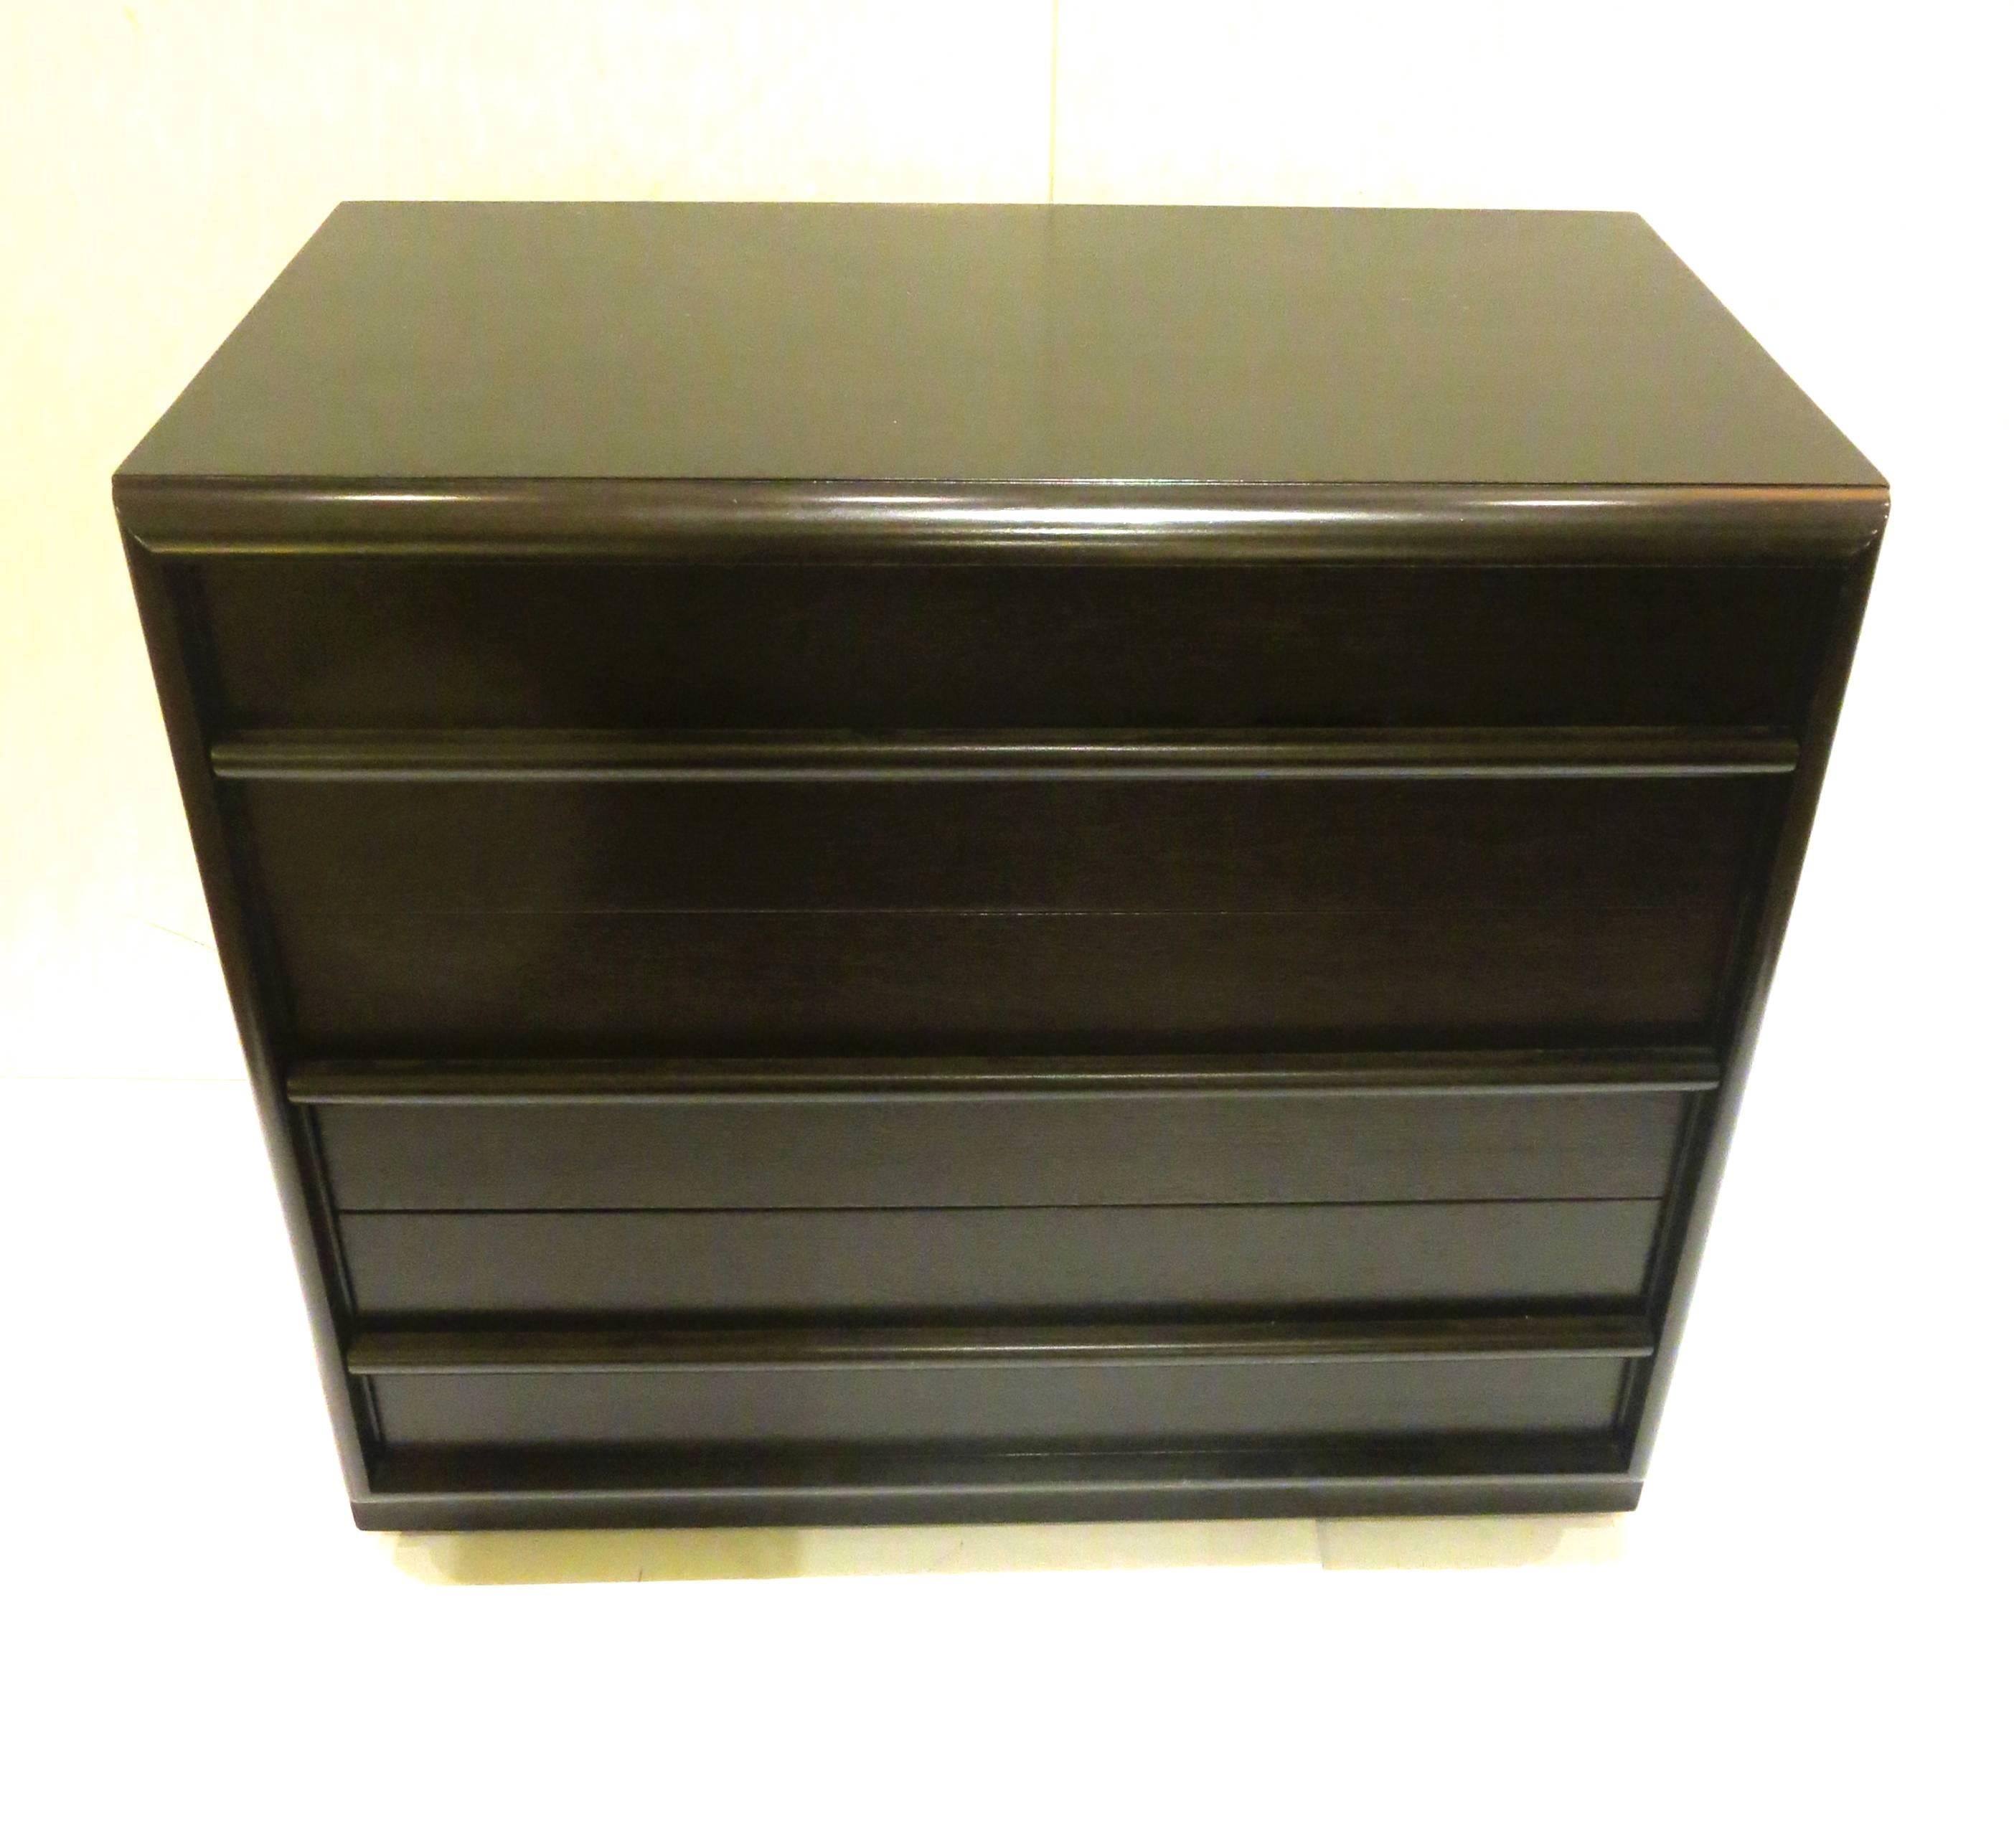 Elegant small triple-drawer dresser designed by Robsjohn-Gibbings for Widdicomb, circa 1950s. Nicely refinished in black ebonized lacquer, perfect size for a guest room.